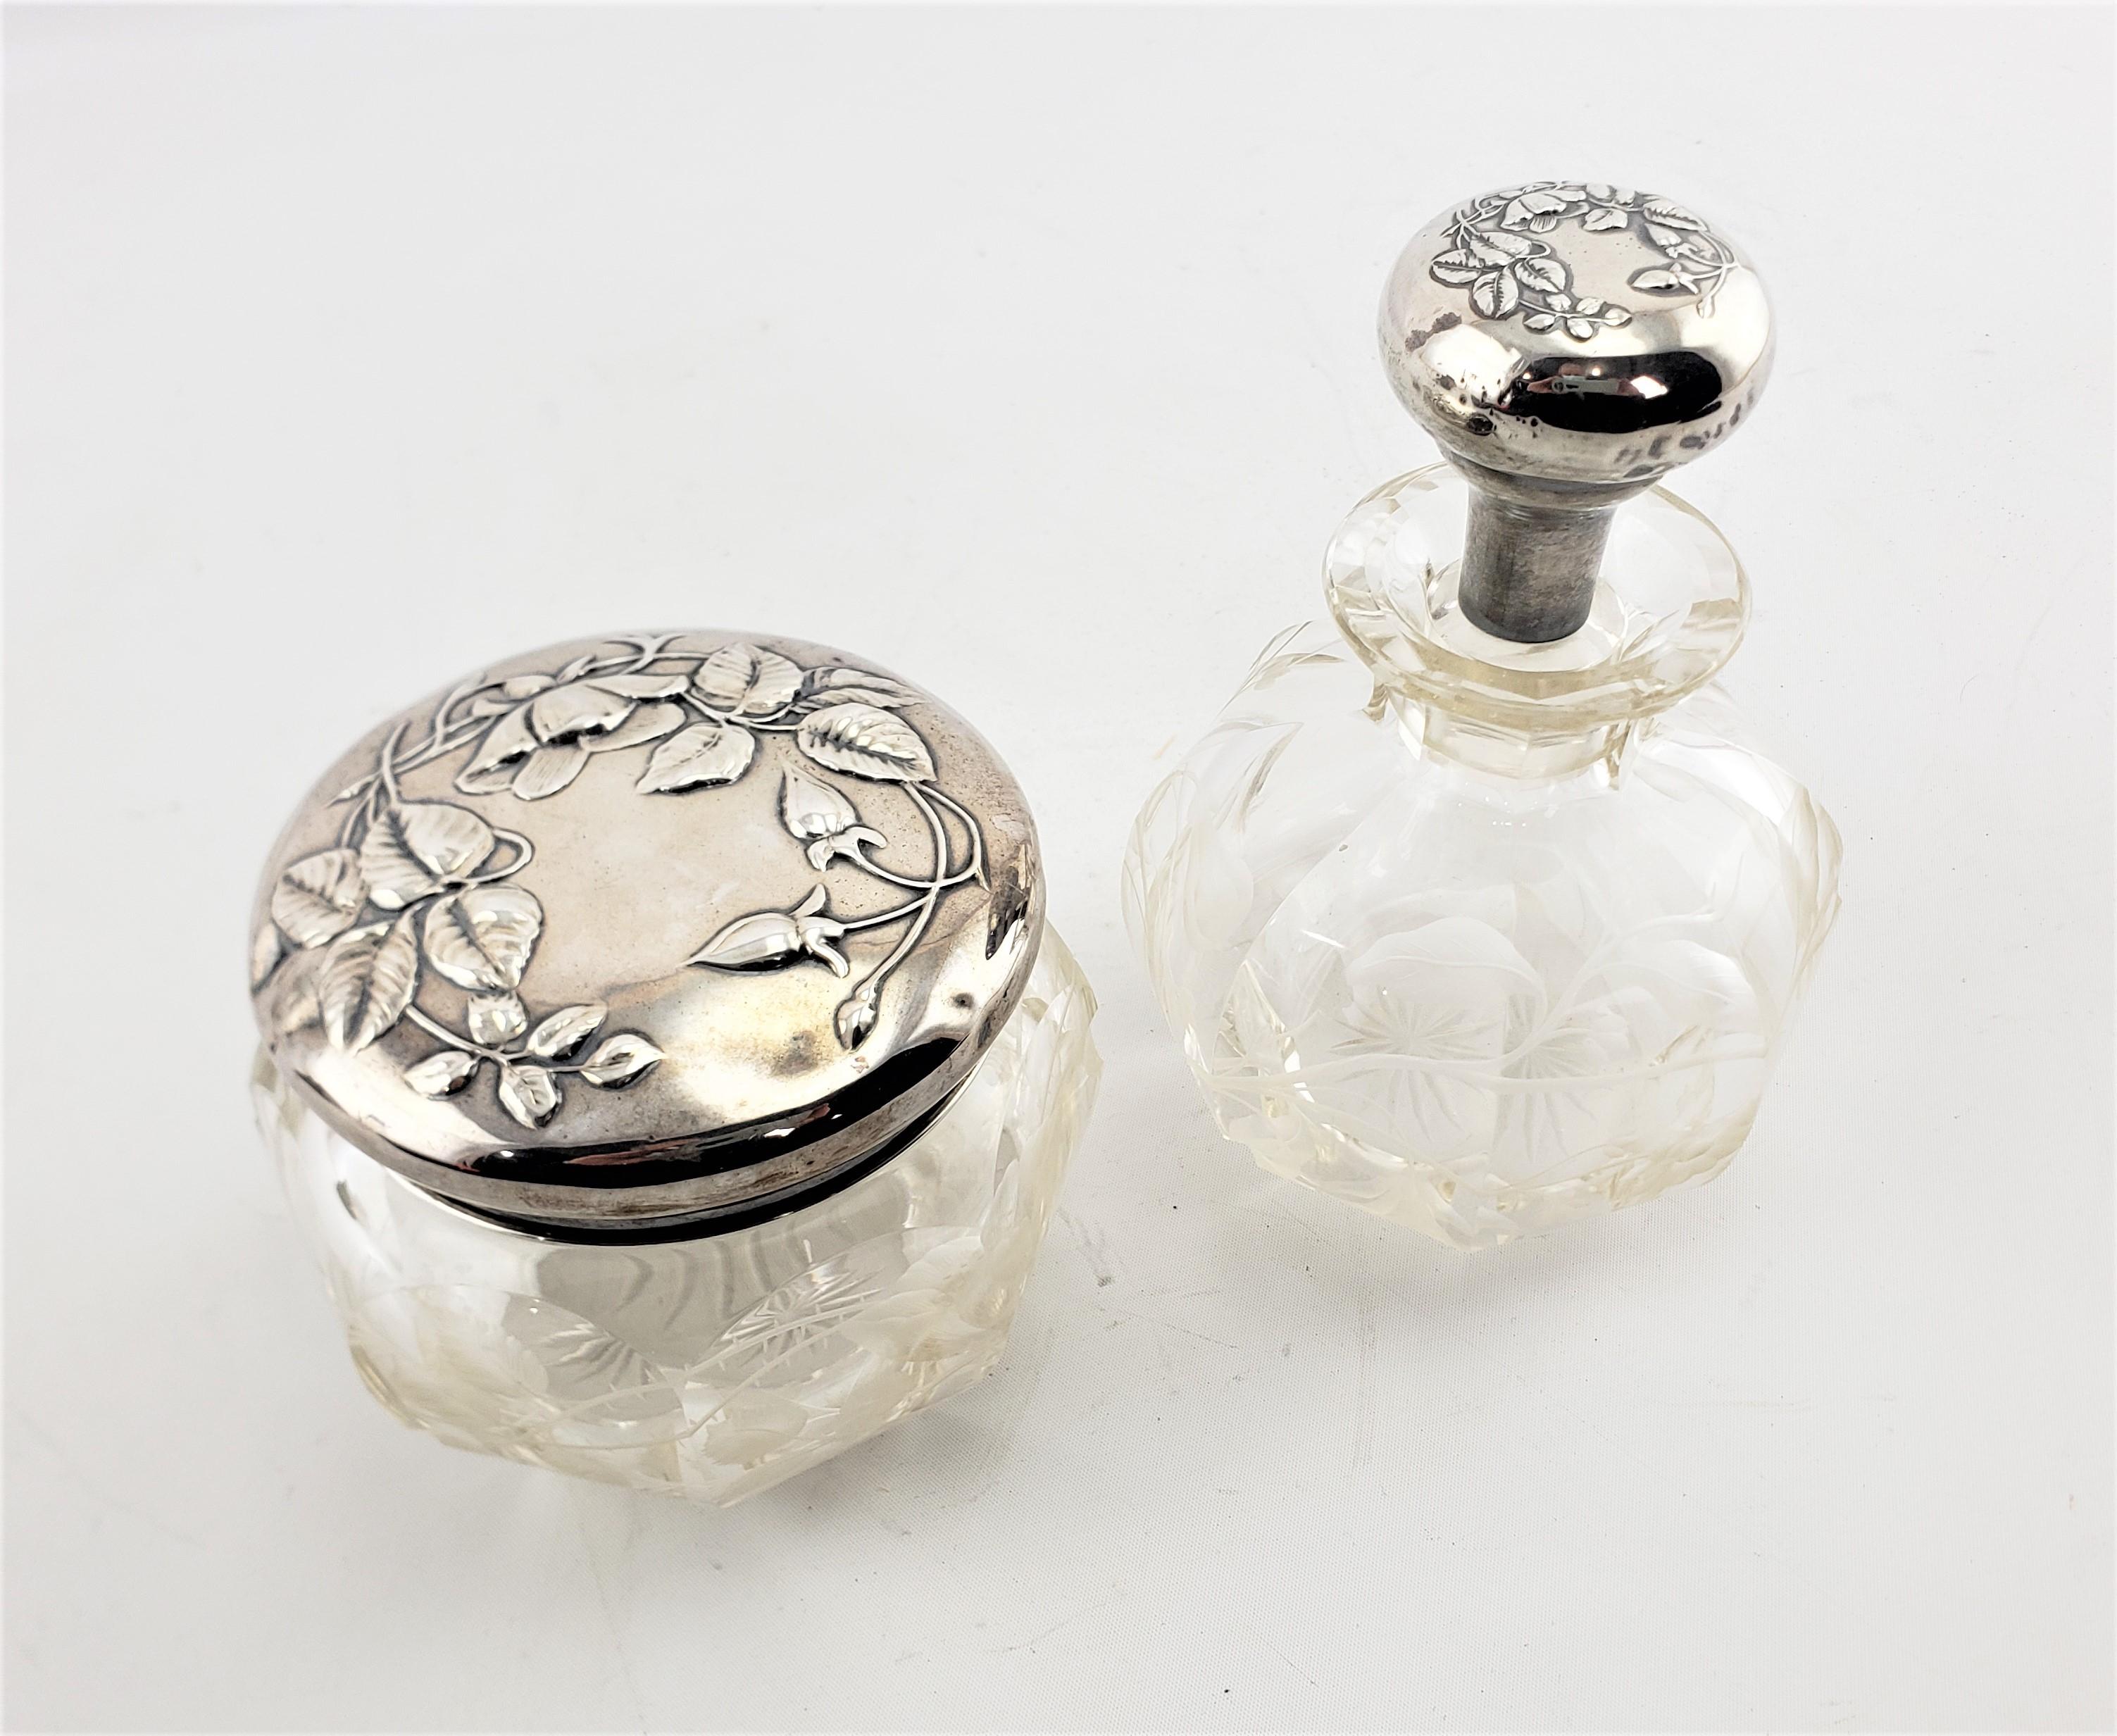 This antique sterling silver and etched crystal powder jar and scent bottle are hallmarked by an unknown maker, but presumed to have originated from England and dating to 1880 and done in the period Victorian style. The tops of this partial dresser